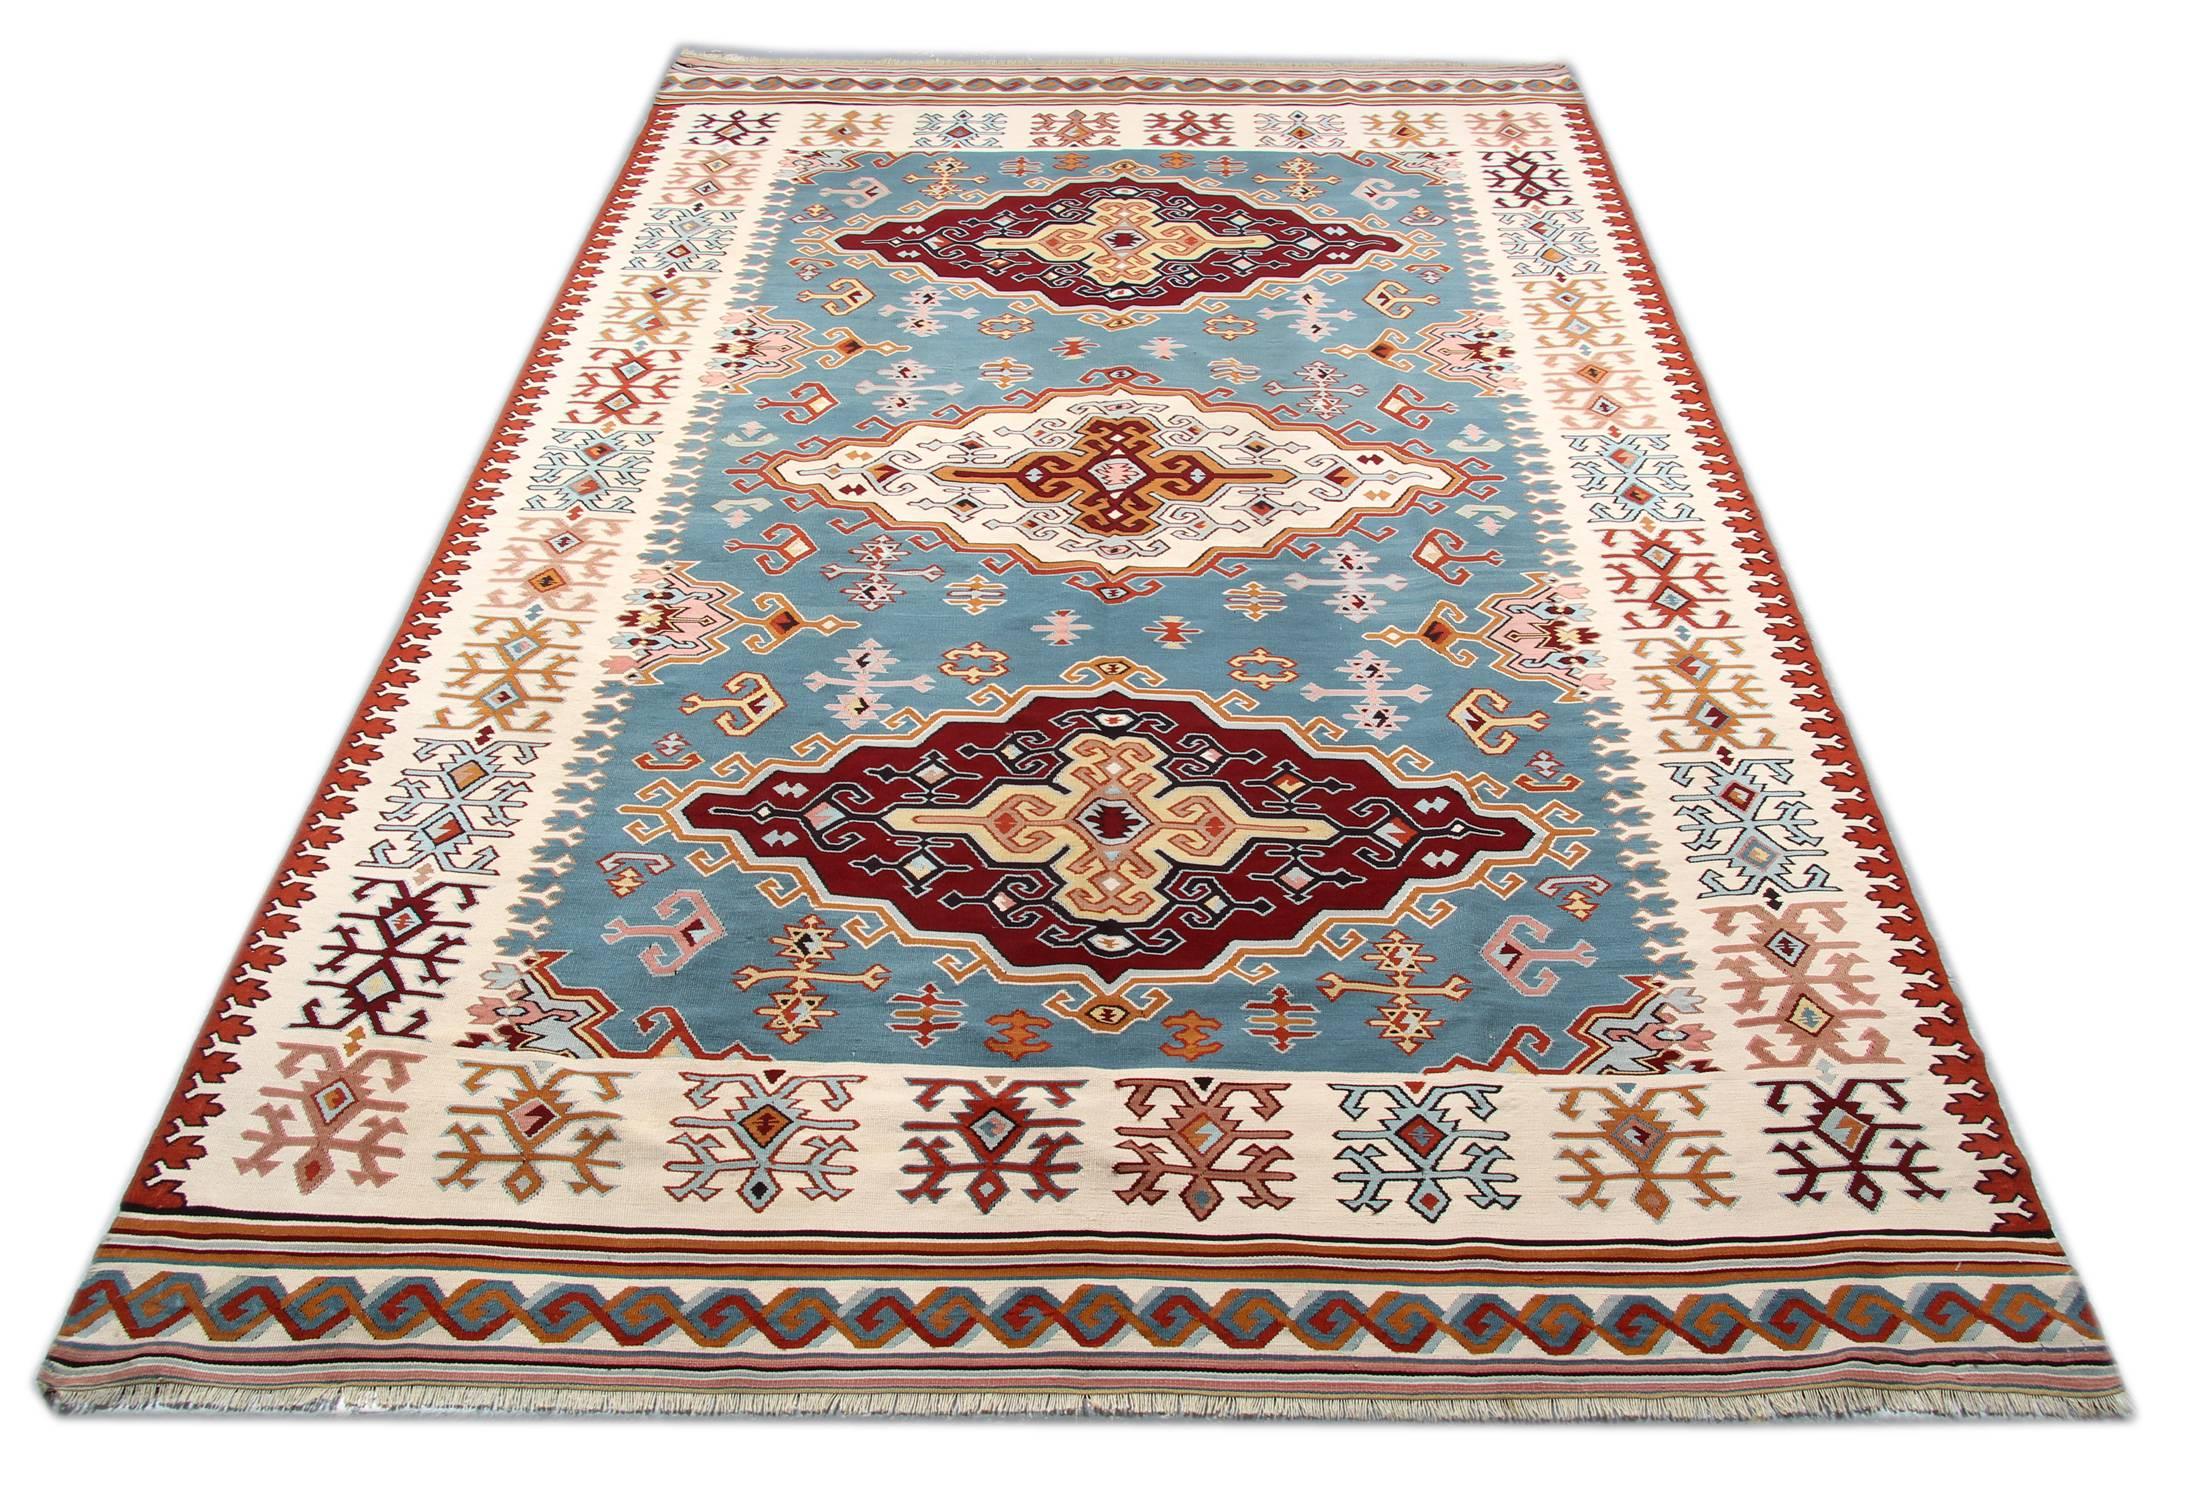 This handmade carpet antique rug Pirot Kelim is an excellent example of Eastern European handwoven and flat-weave tapestry rugs, traditionally produced in Pirot, a town in southeastern Serbia. The yarns are all handspun and had been dyed by organic